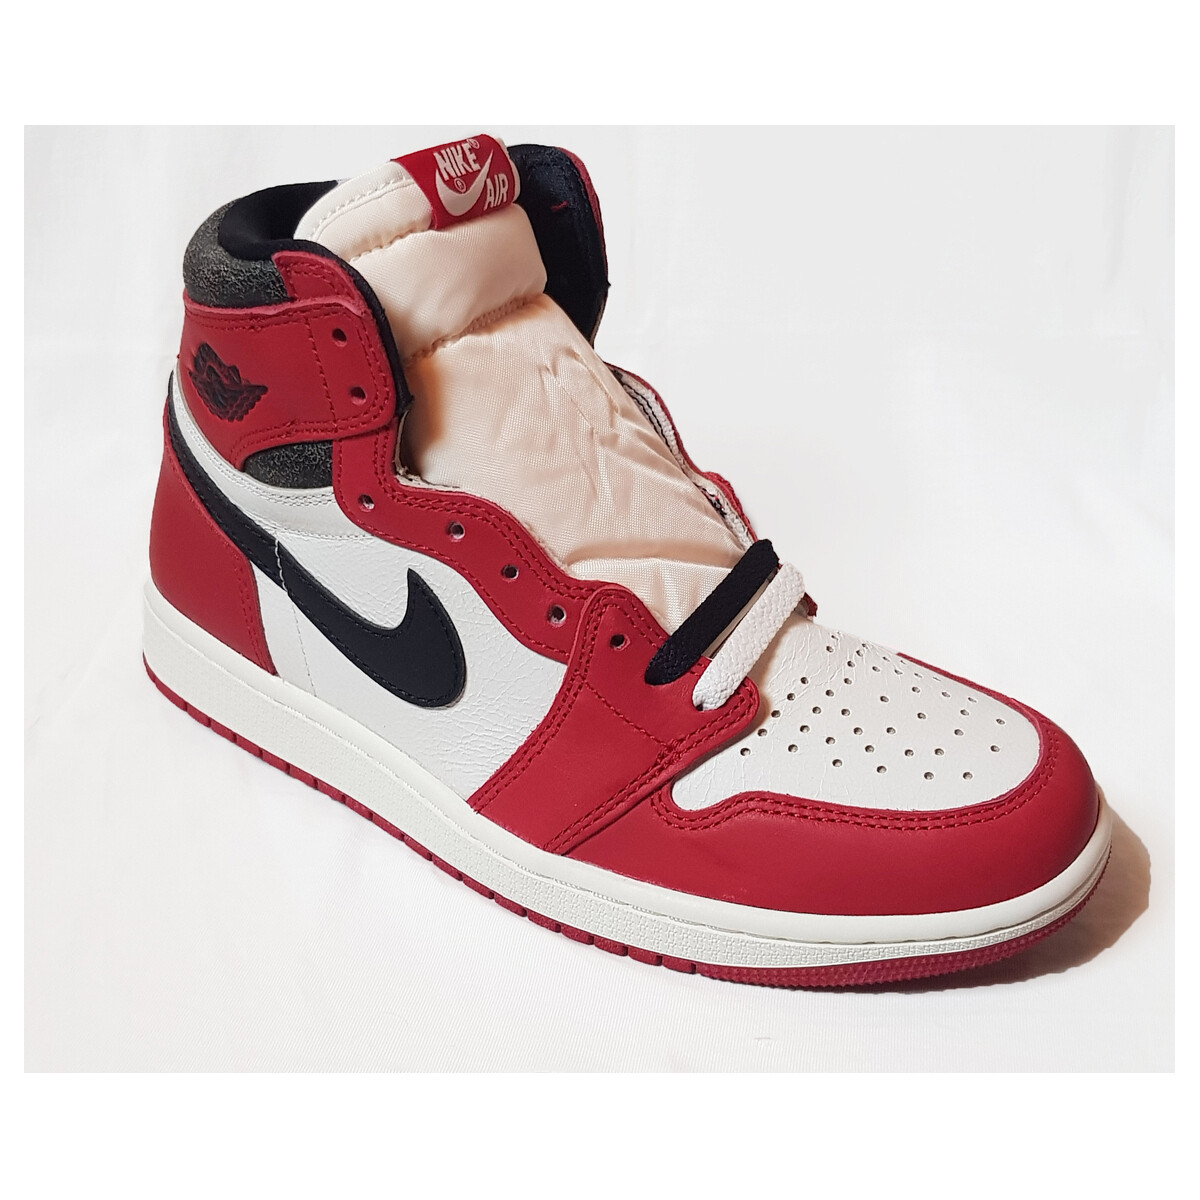 Nike Rouge Air Jordan 1 High Lost and Found - DZ5485-612 - Taille : 40 FR pYiY65M4